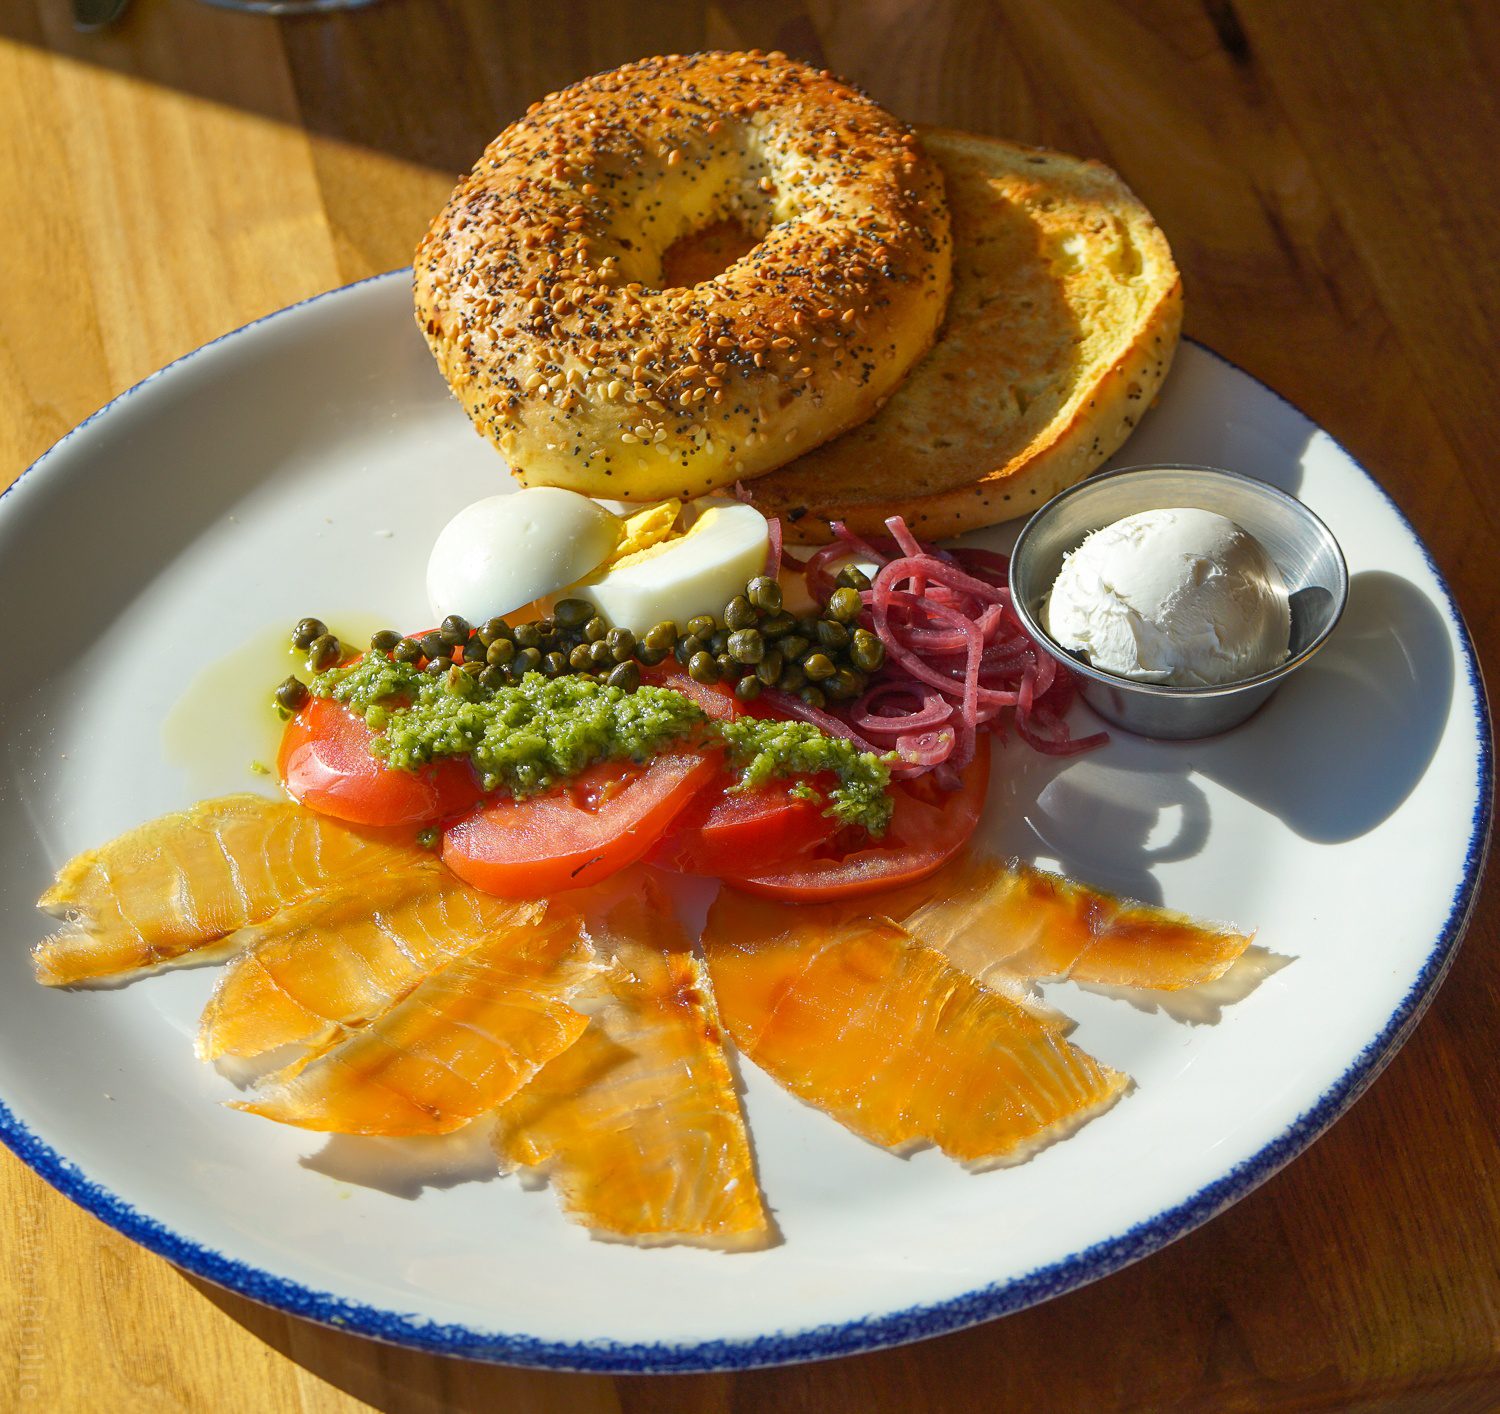 Inn by the Sea Maine Resort: Bagel and lox brunch